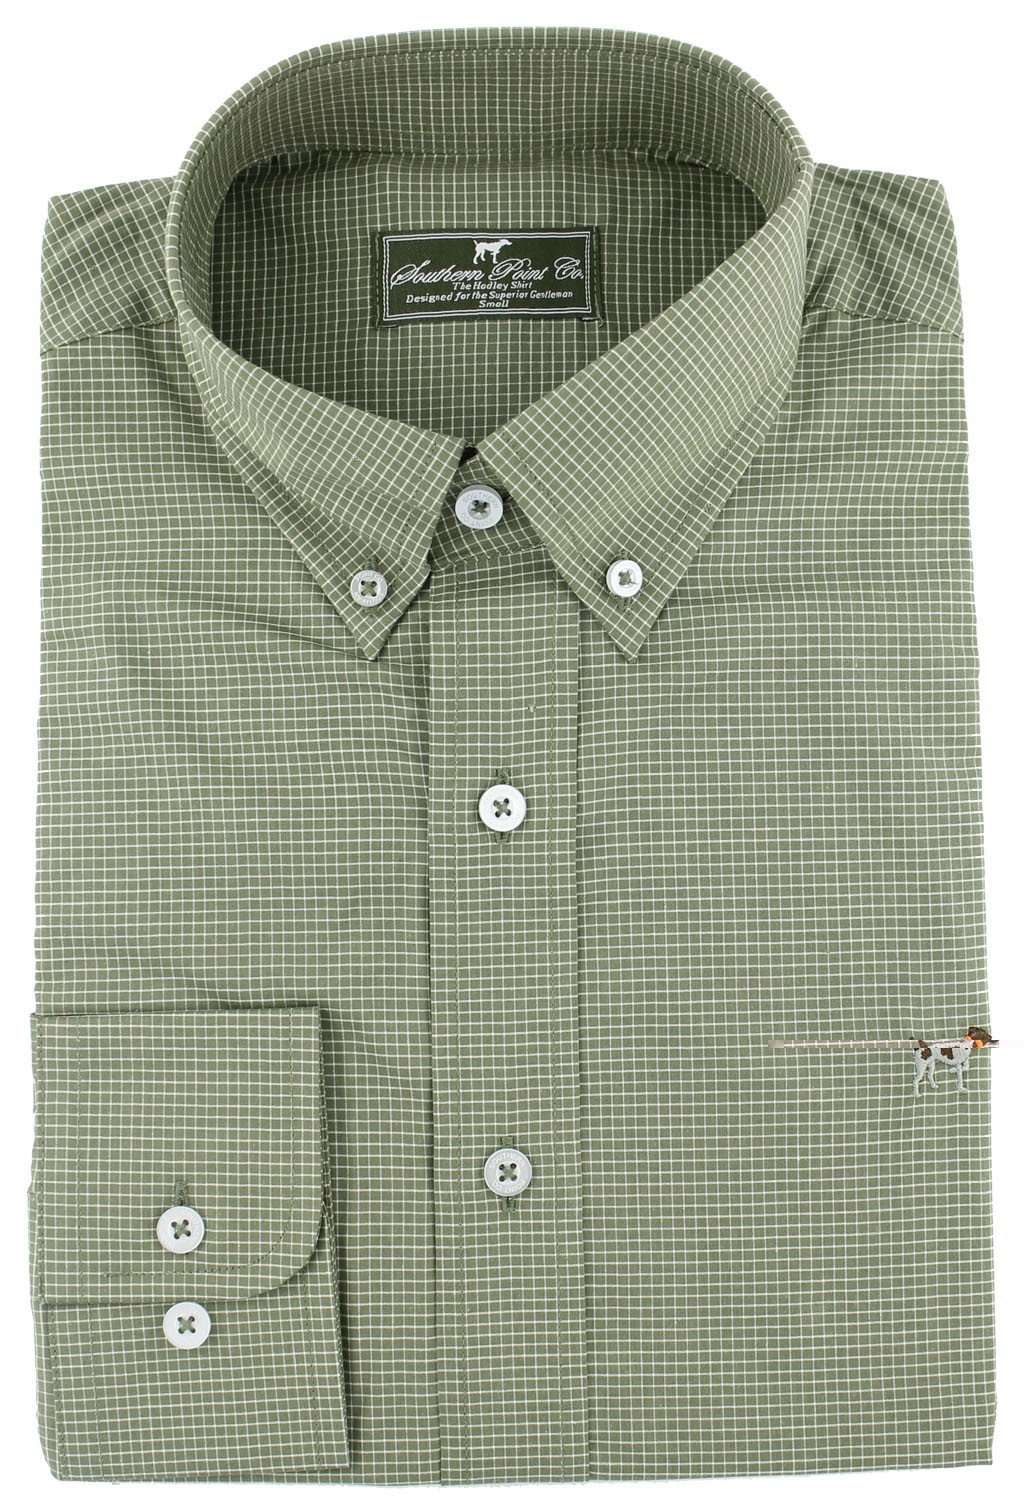 The Hadley Shirt in Pine Check by Southern Point Co. - Country Club Prep